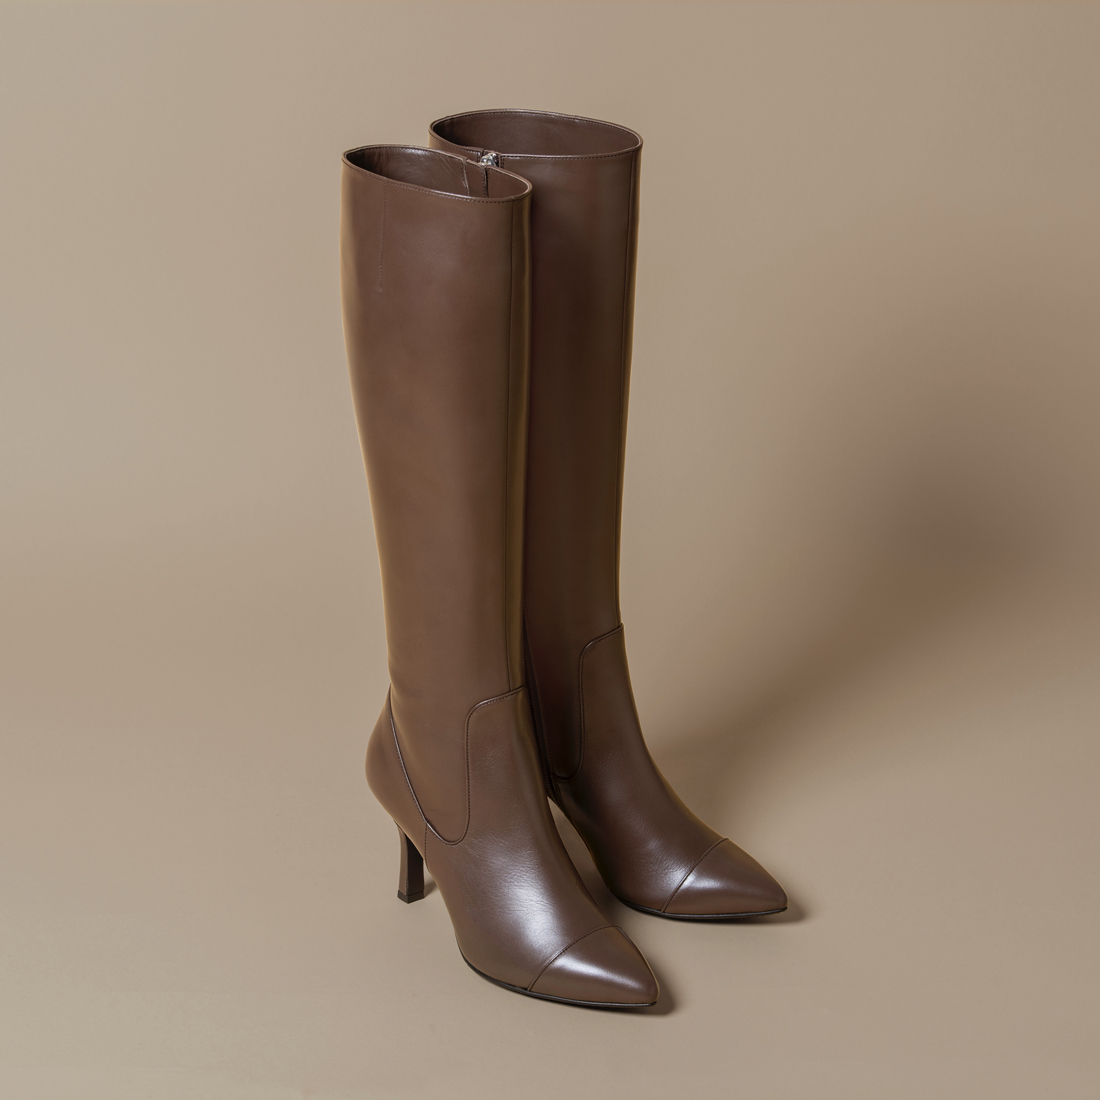 Pointed Toe Long Boots - Limit till 2359